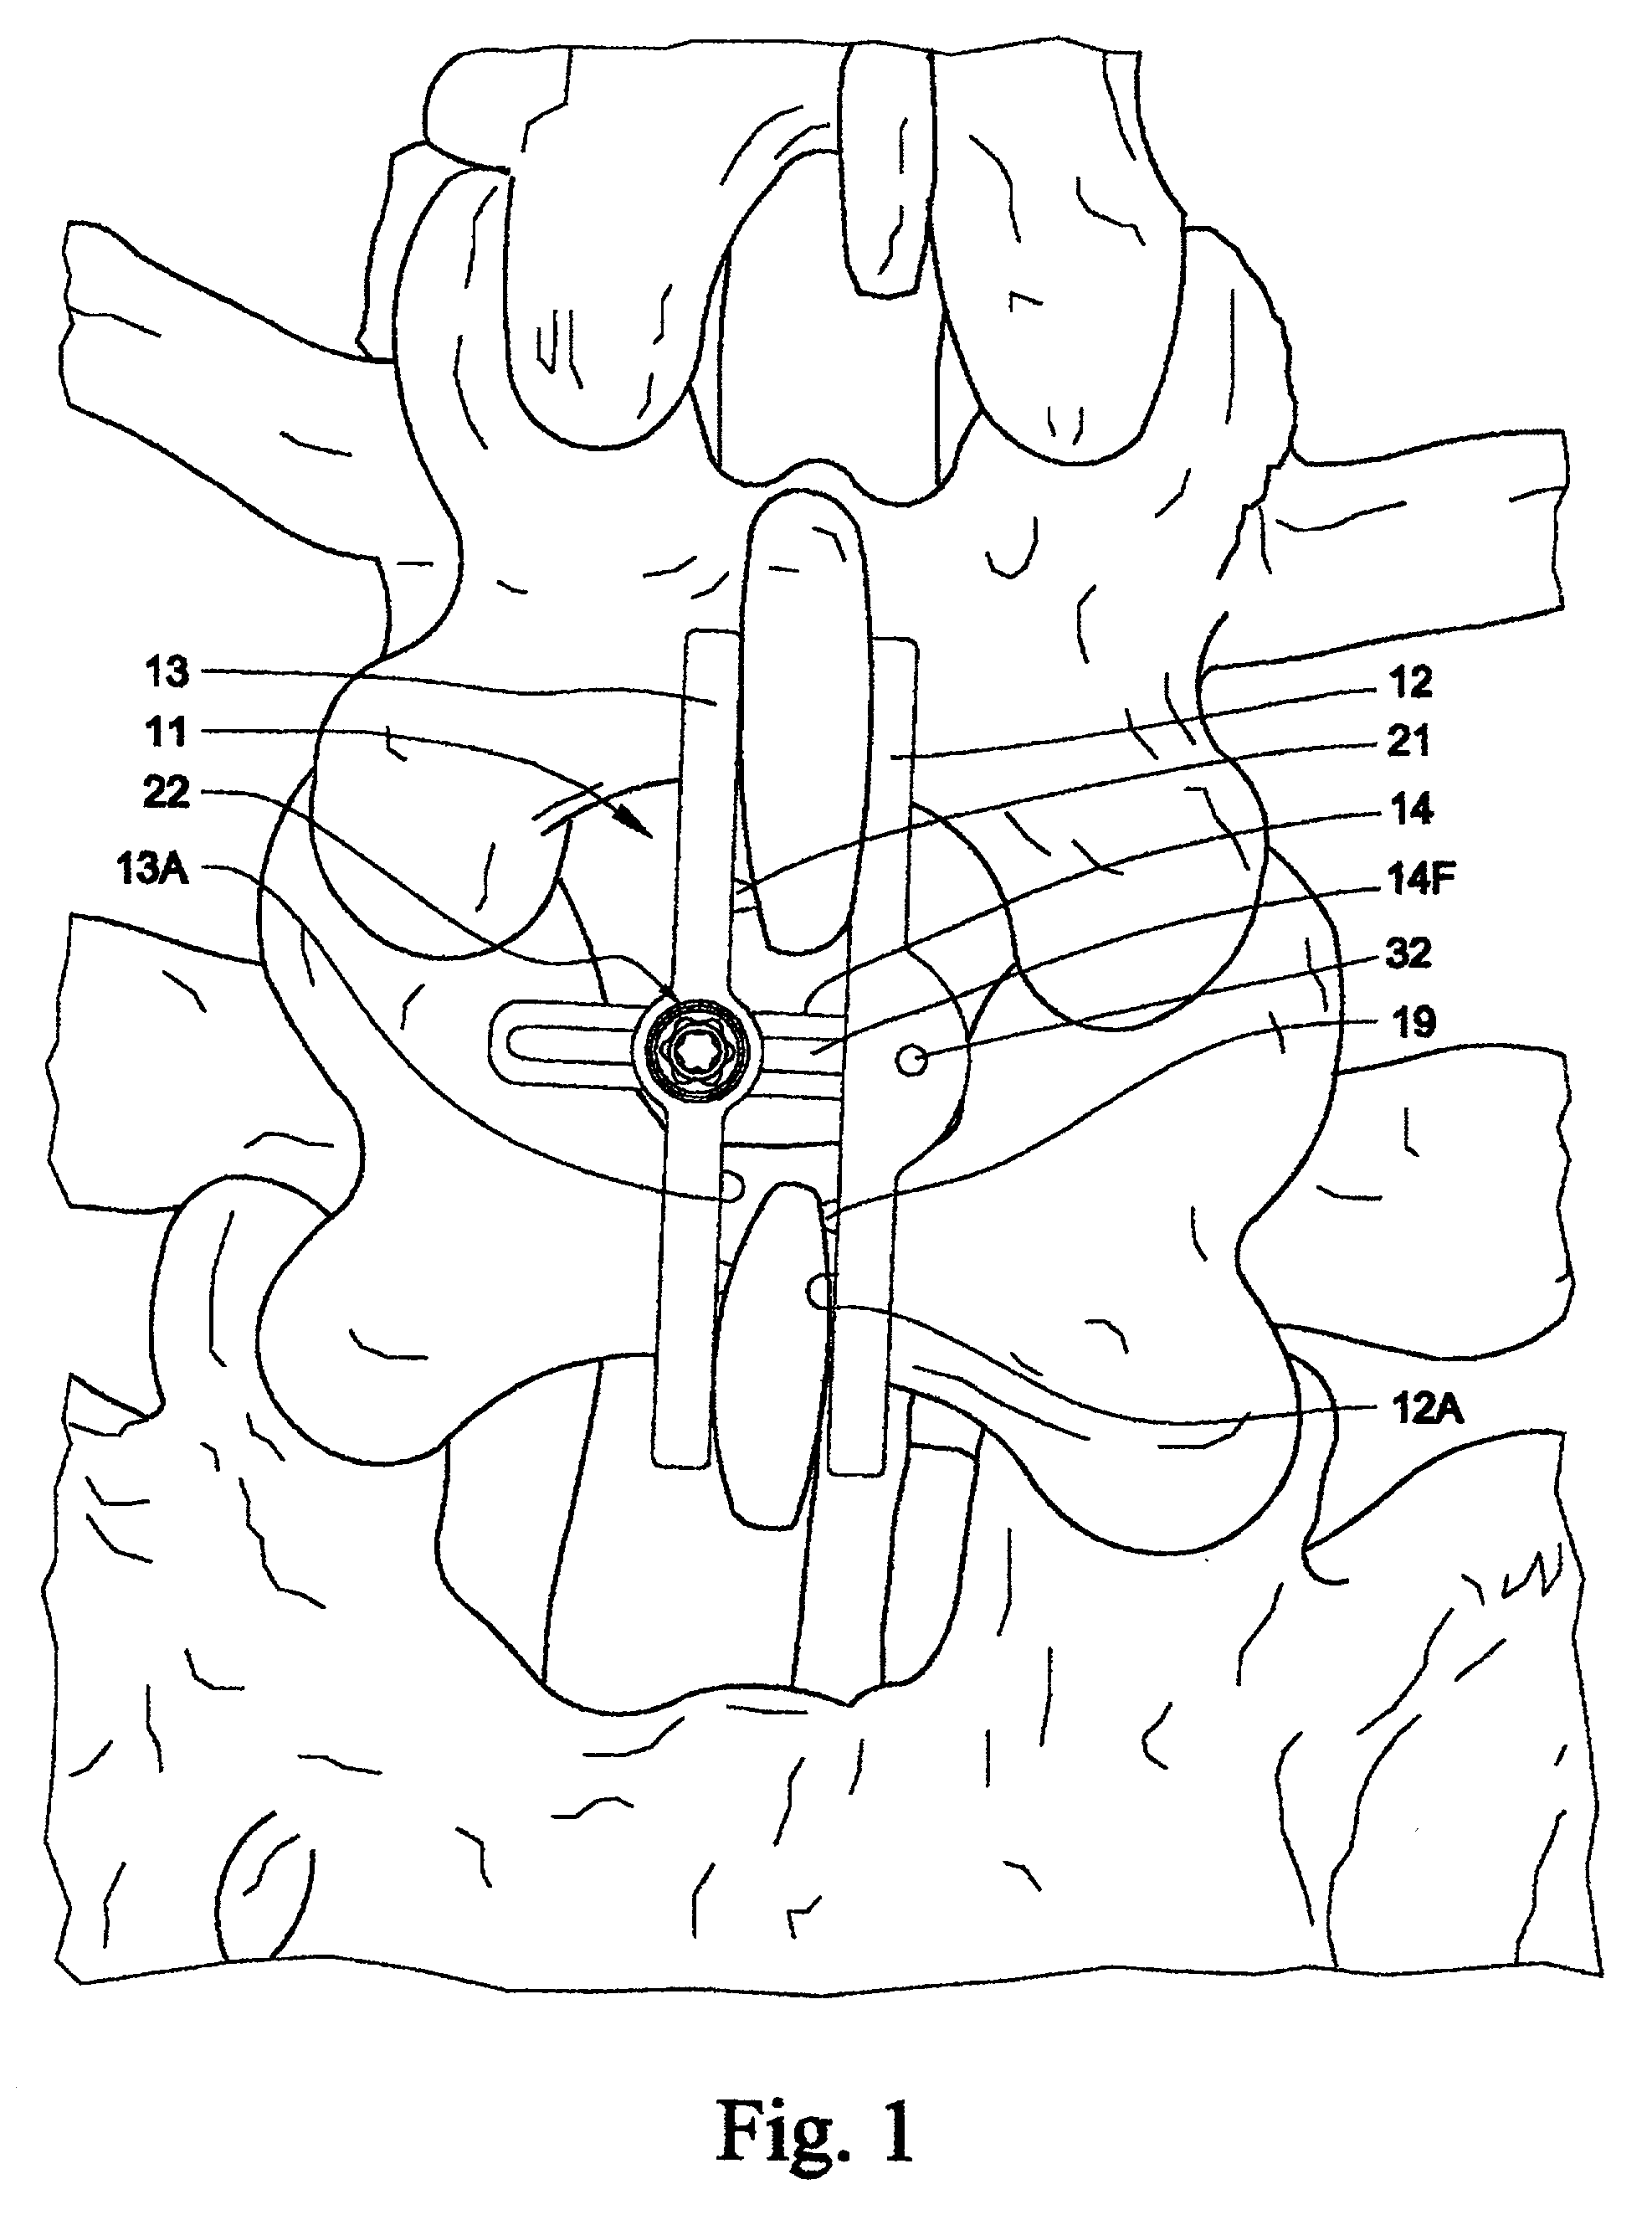 Device for fixation of spinous processes